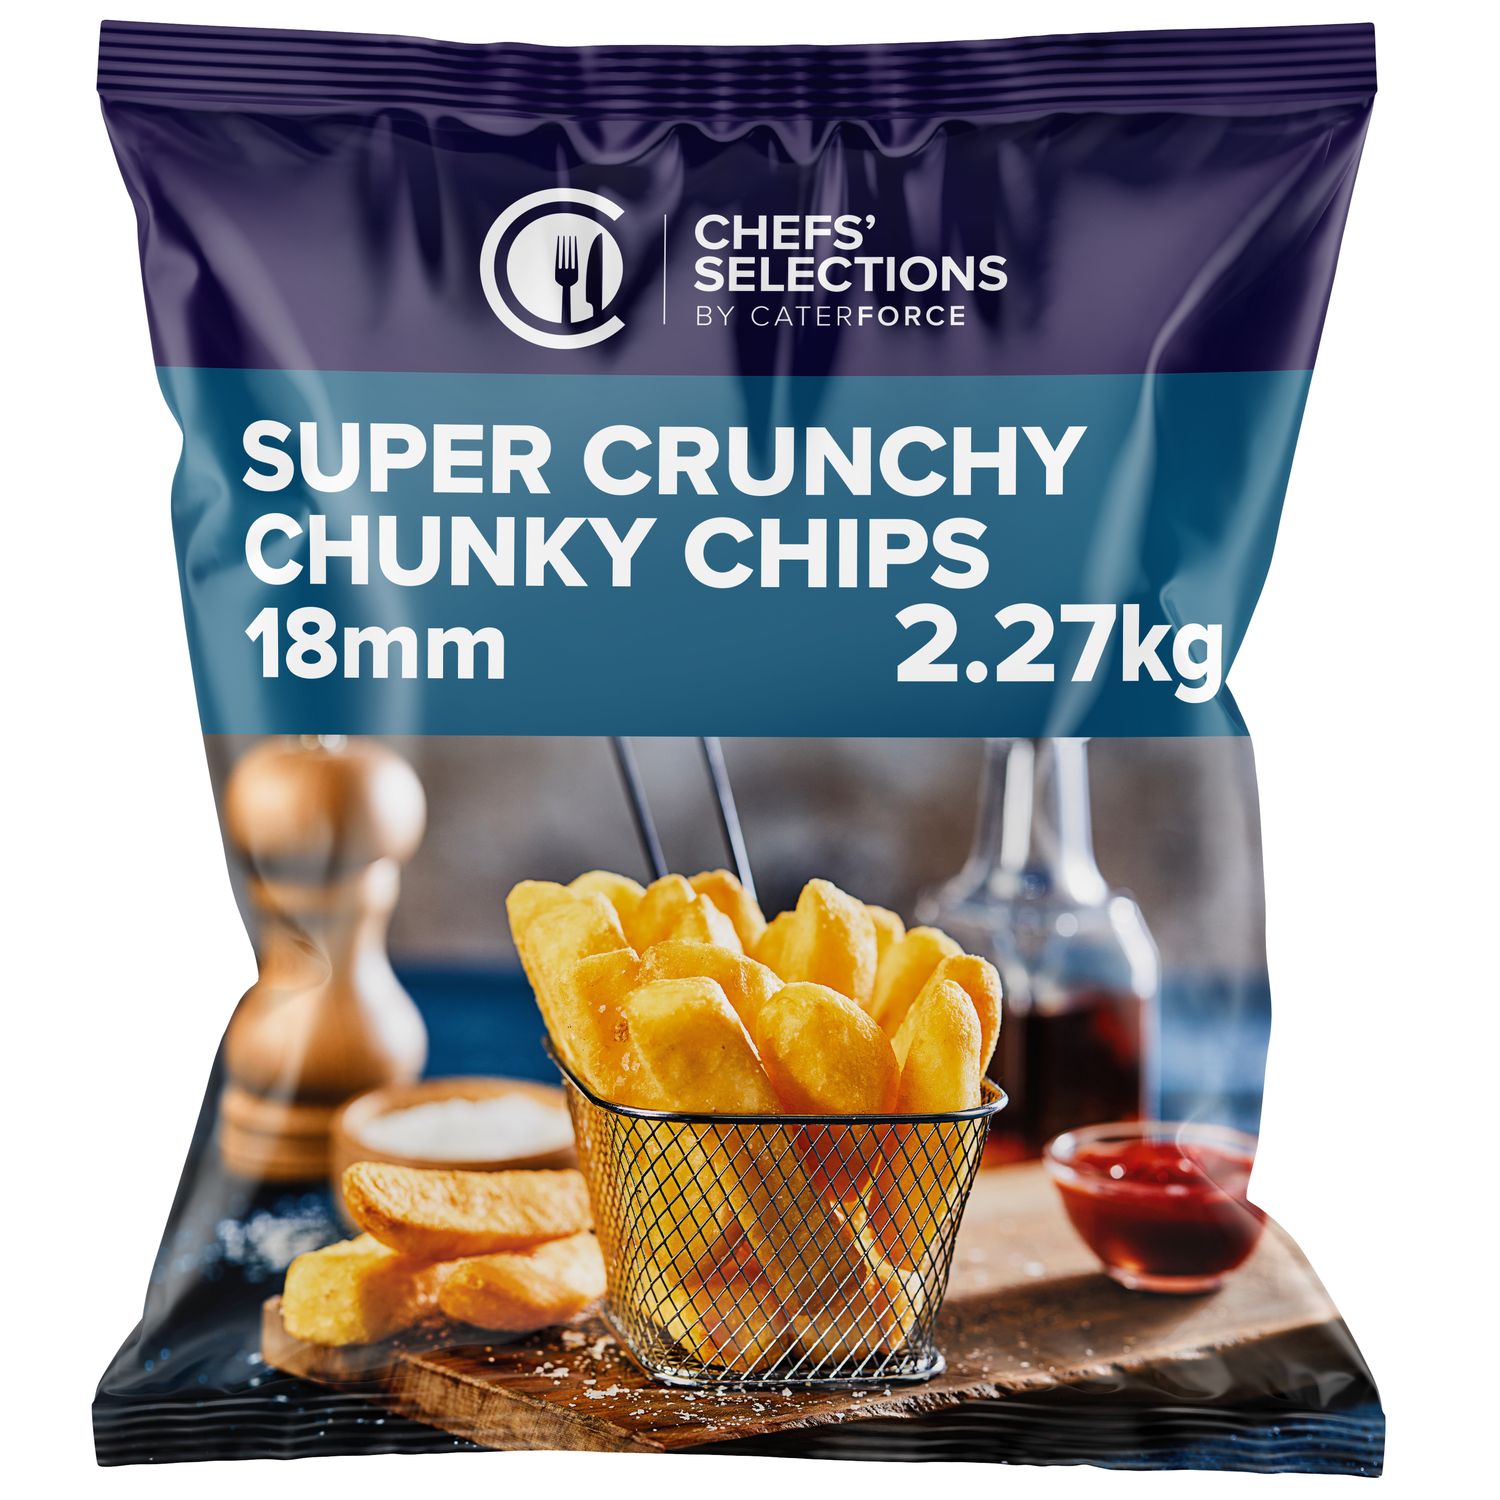 Chefs’ Selections Coated Chips 18mm (4 x 2.27kg)